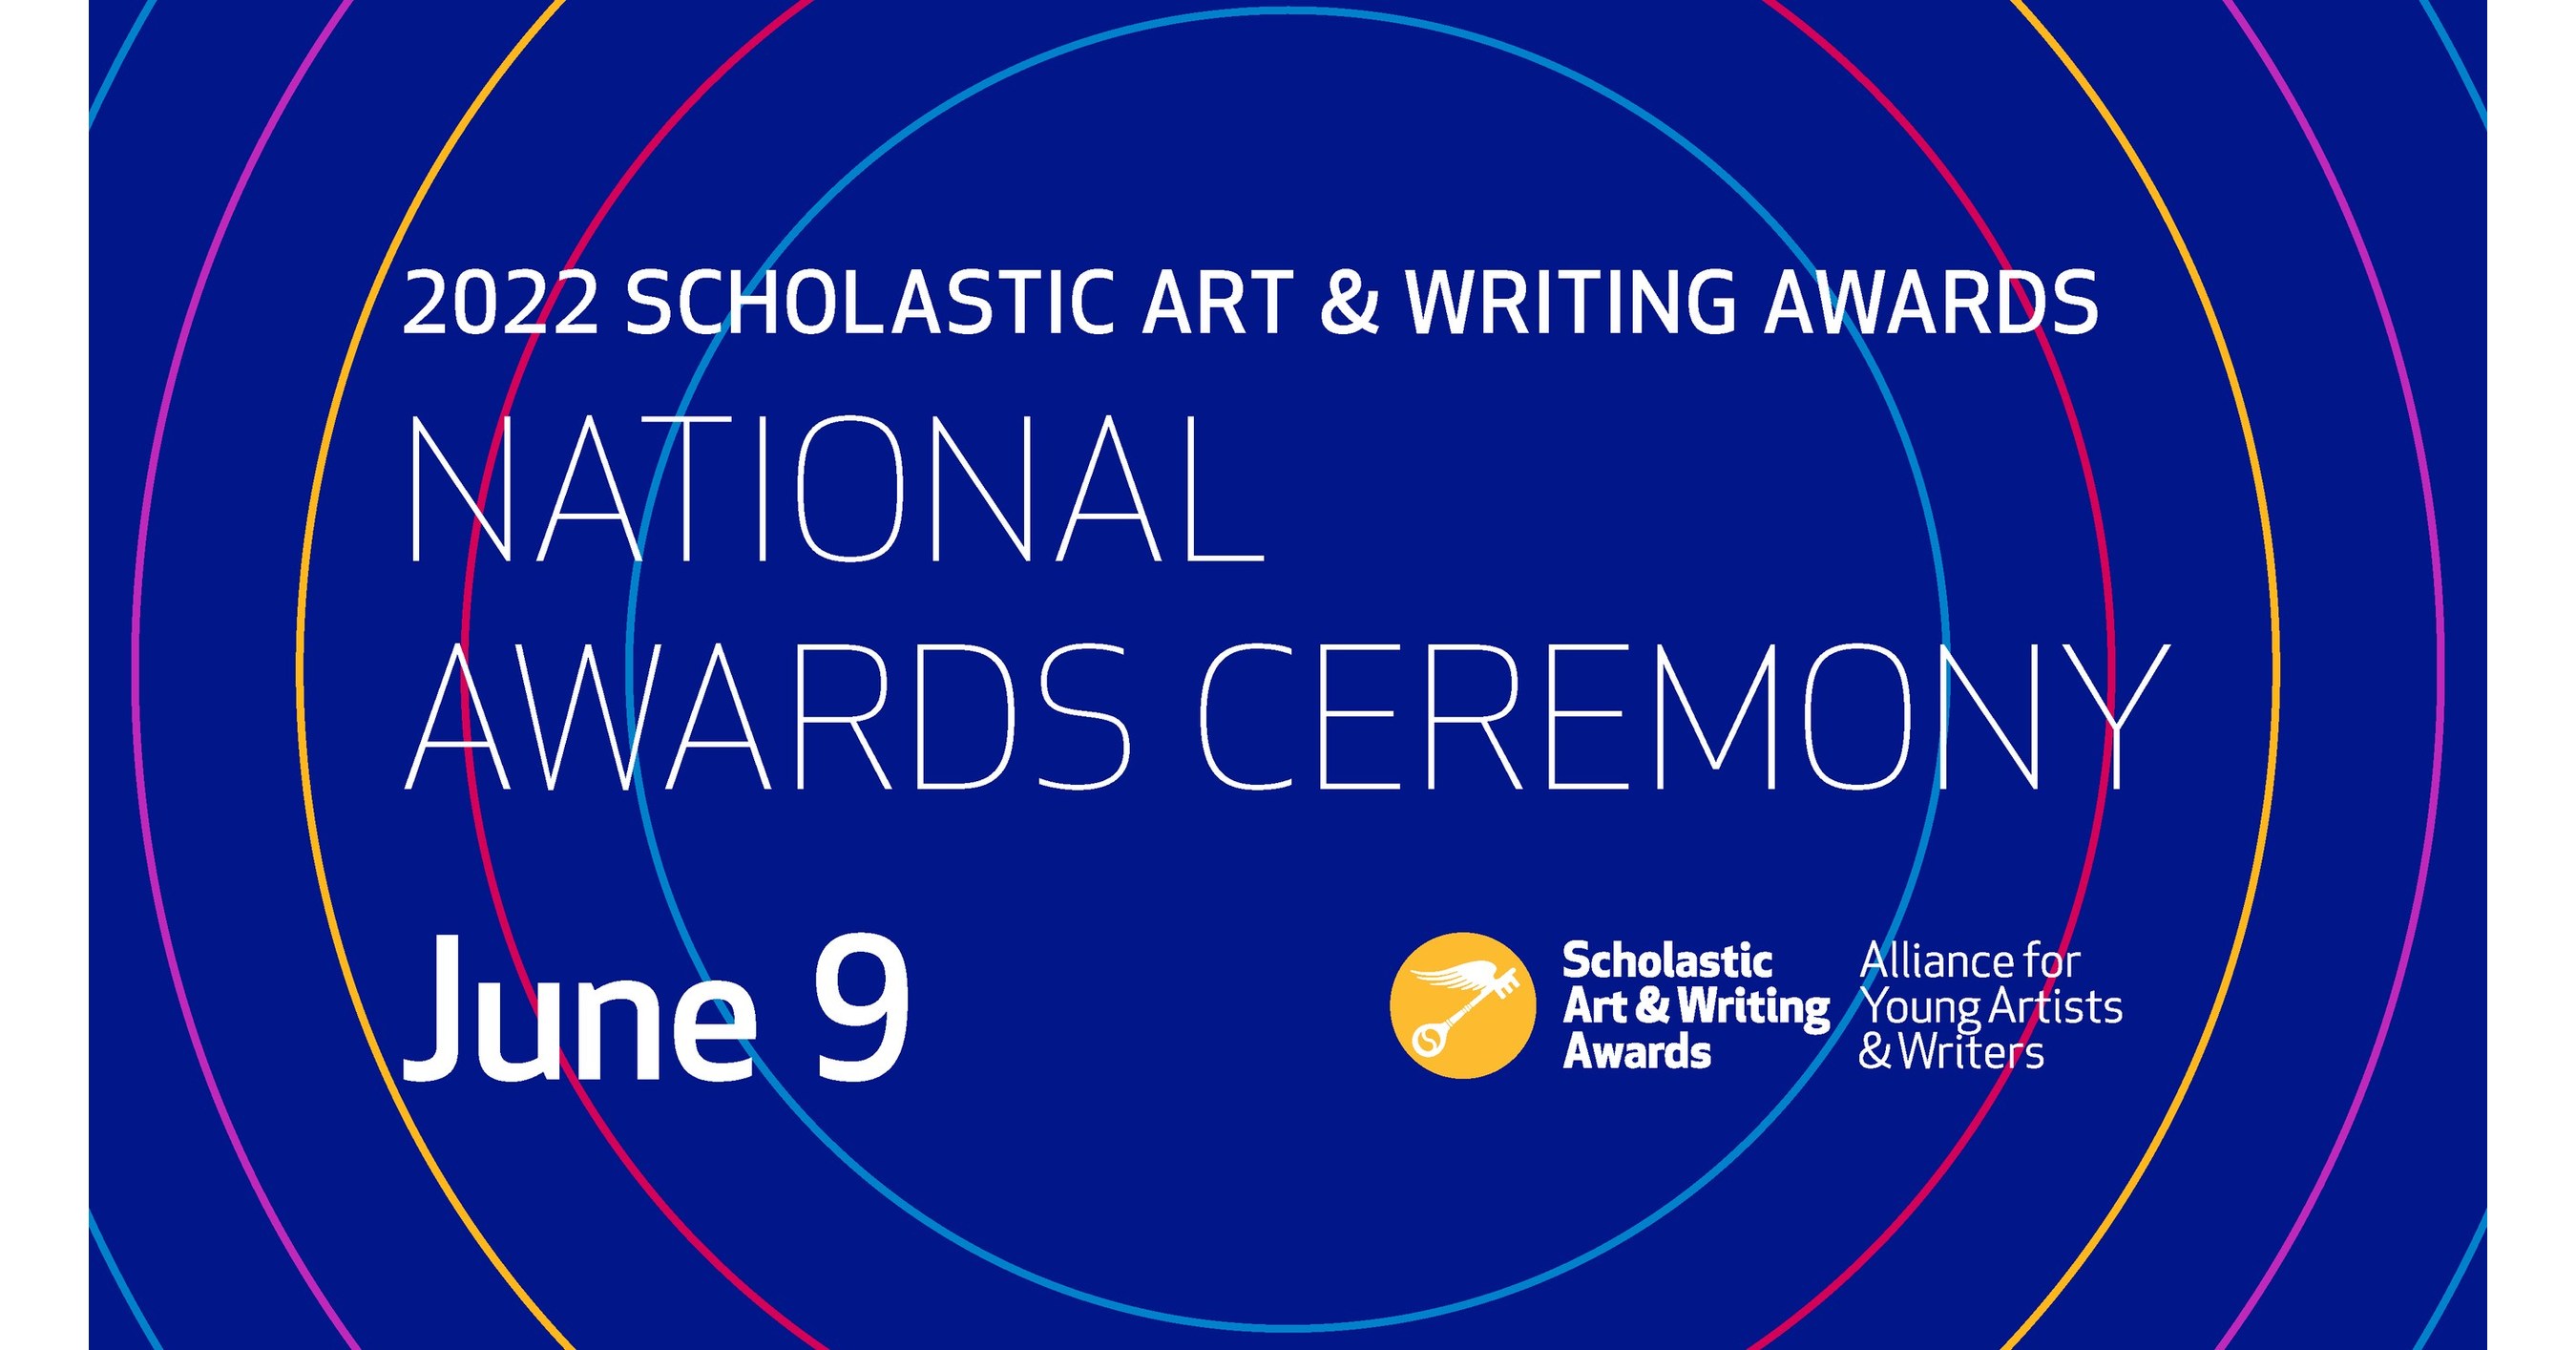 Scholastic Art & Writing Awards National Ceremony Premieres June 14th